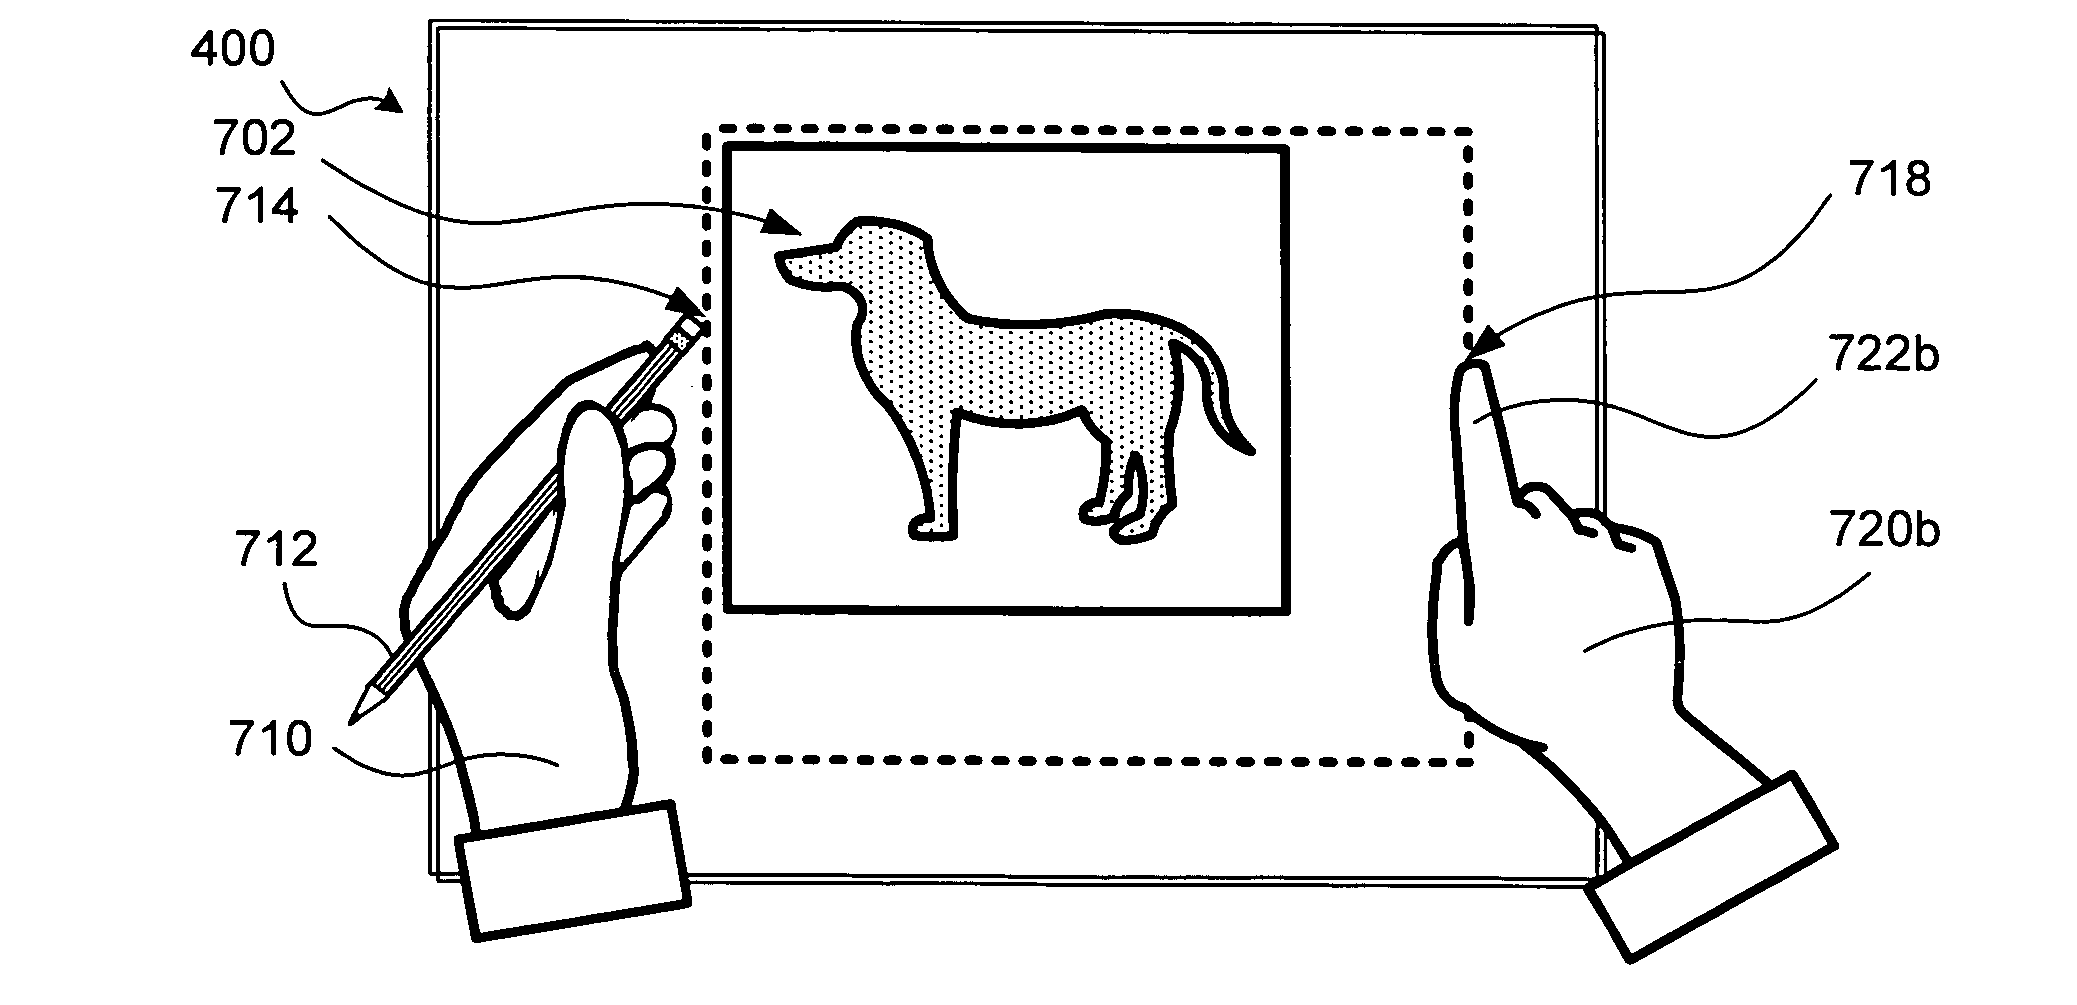 Using physical objects to adjust attributes of an interactive display application